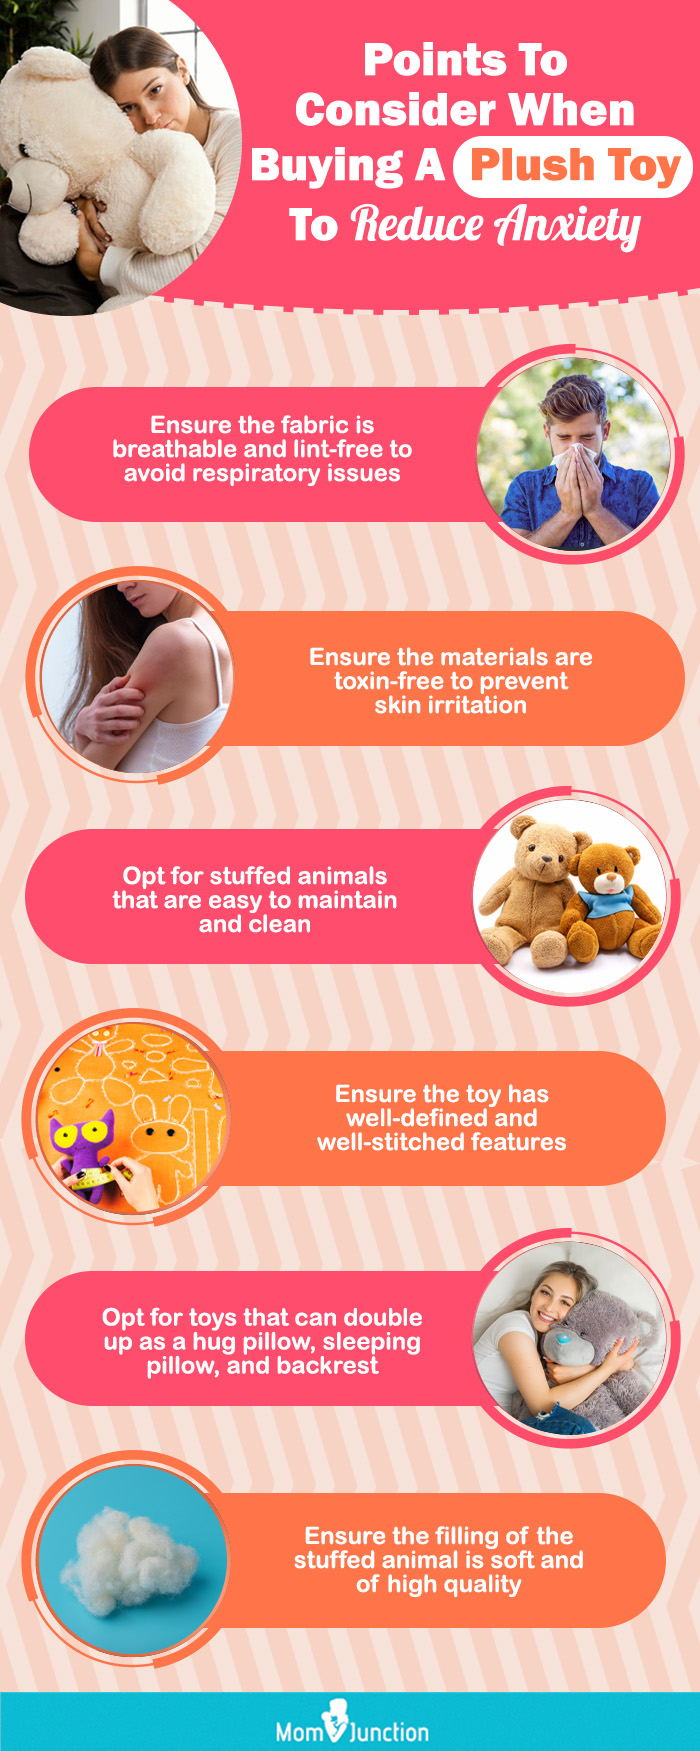 Points To Consider When Buying A Plush Toy To Reduce Anxiety